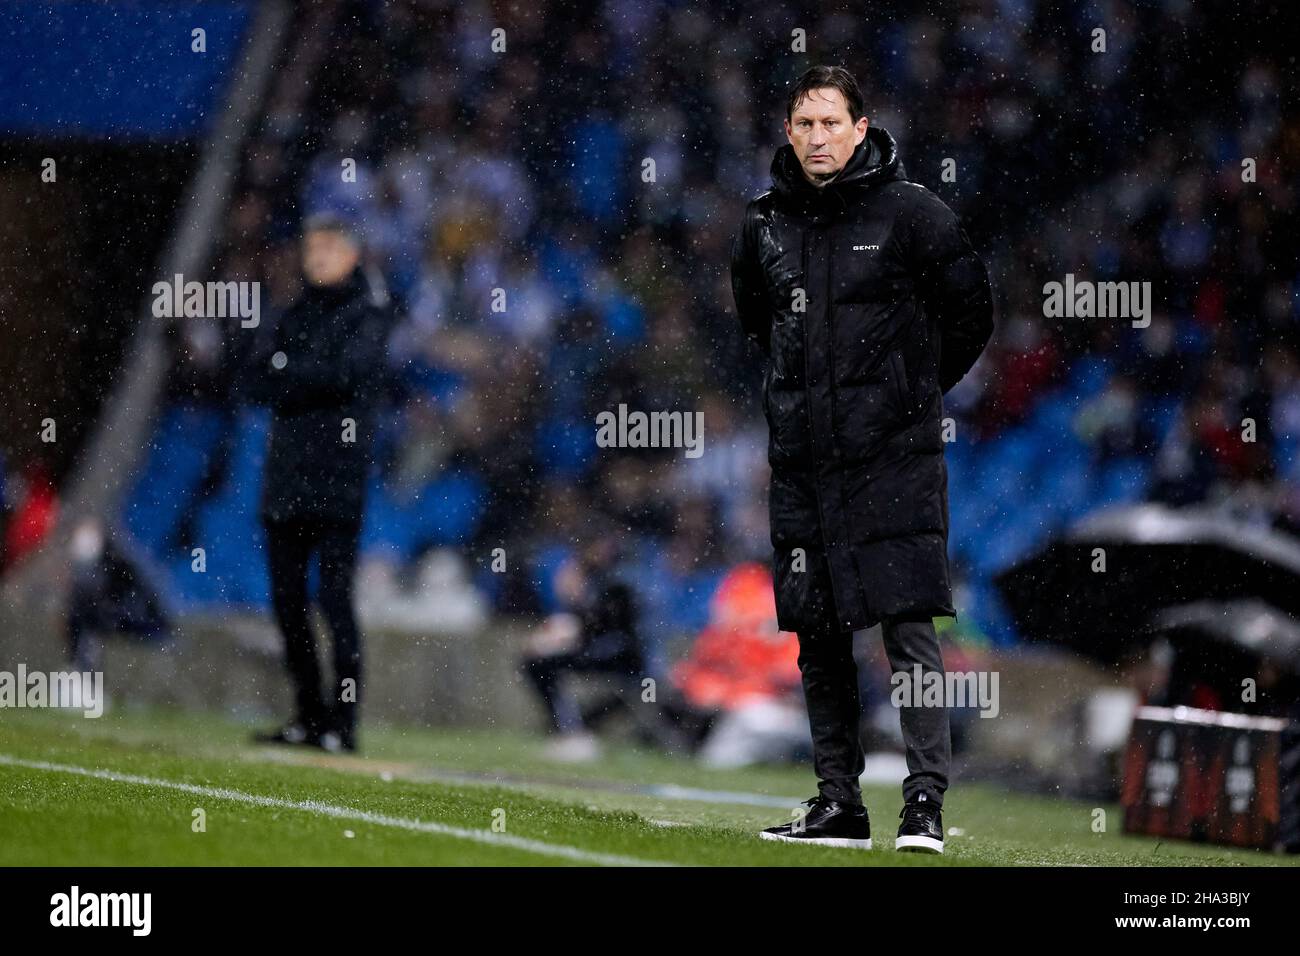 SAN SEBASTIAN, SPAIN - DECEMBER 09: Roger Schmidt Head coach of PSV Eindhoven looks on during the UEFA Europa League group B match between Real Sociedad and PSV Eindhoven at Estadio Anoeta on December 9, 2021 in San Sebastian, Spain. (Photo by MB Media) Stock Photo